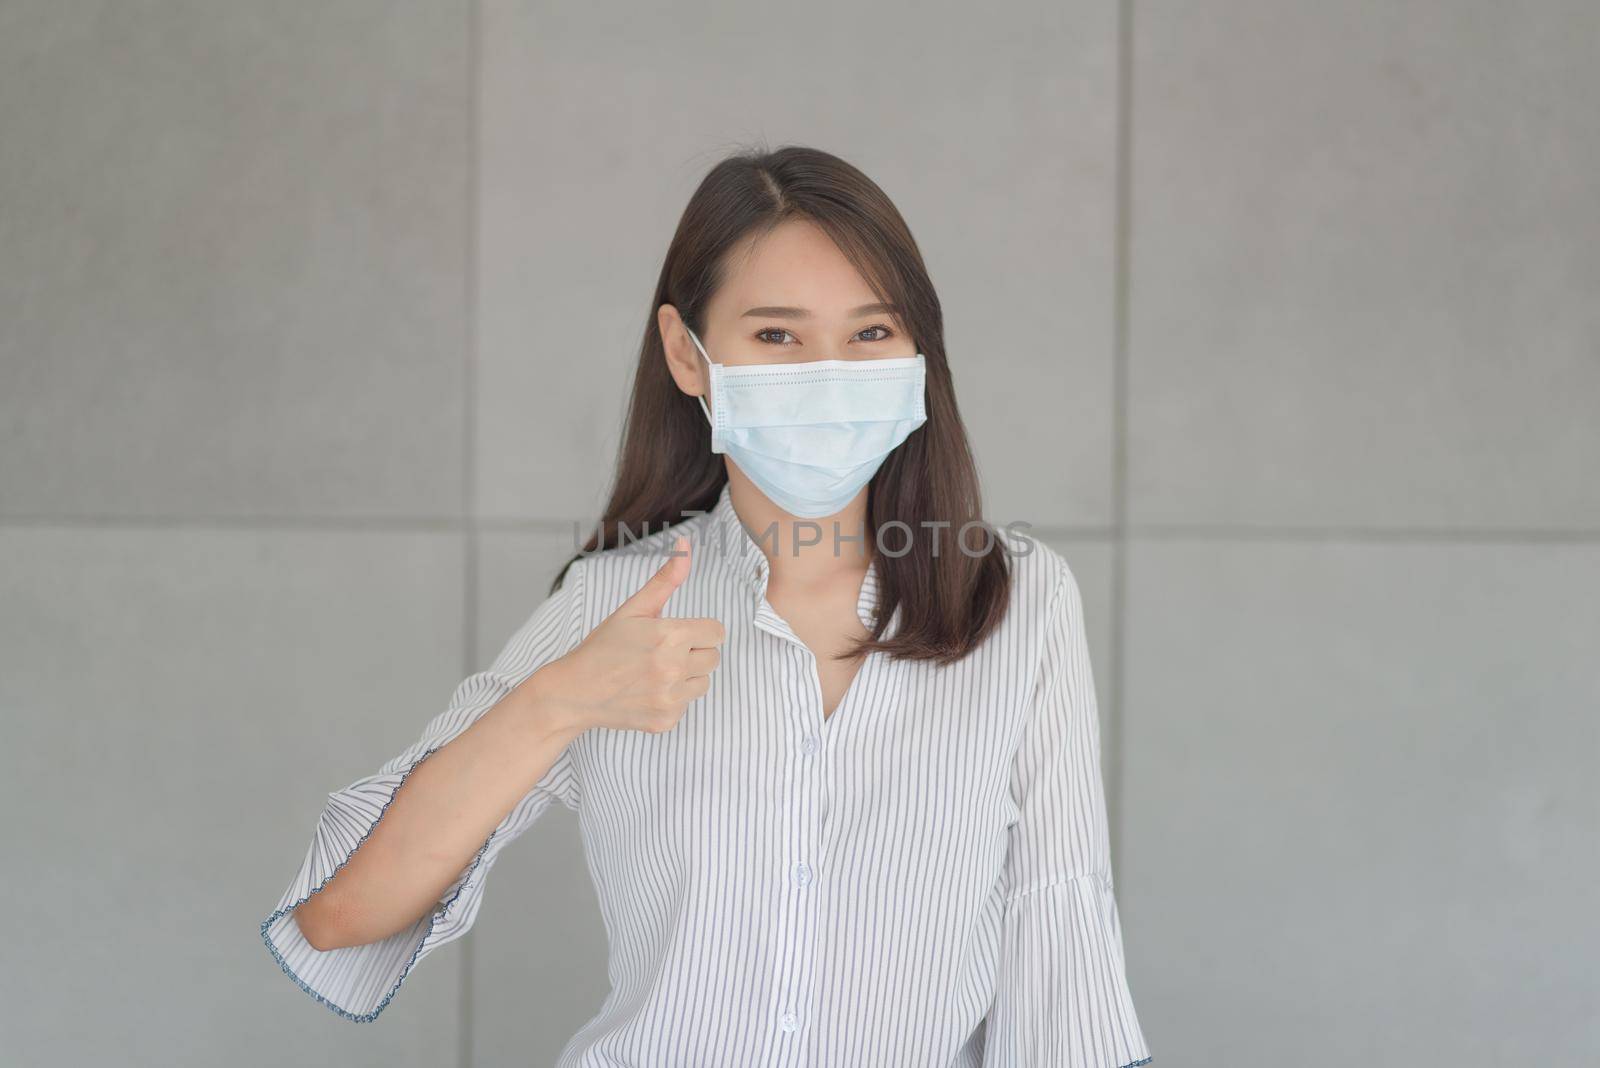 Business employee wearing mask during work in office to keep hygiene follow company policy.Preventive during the period of epidemic from coronavirus or covid19.